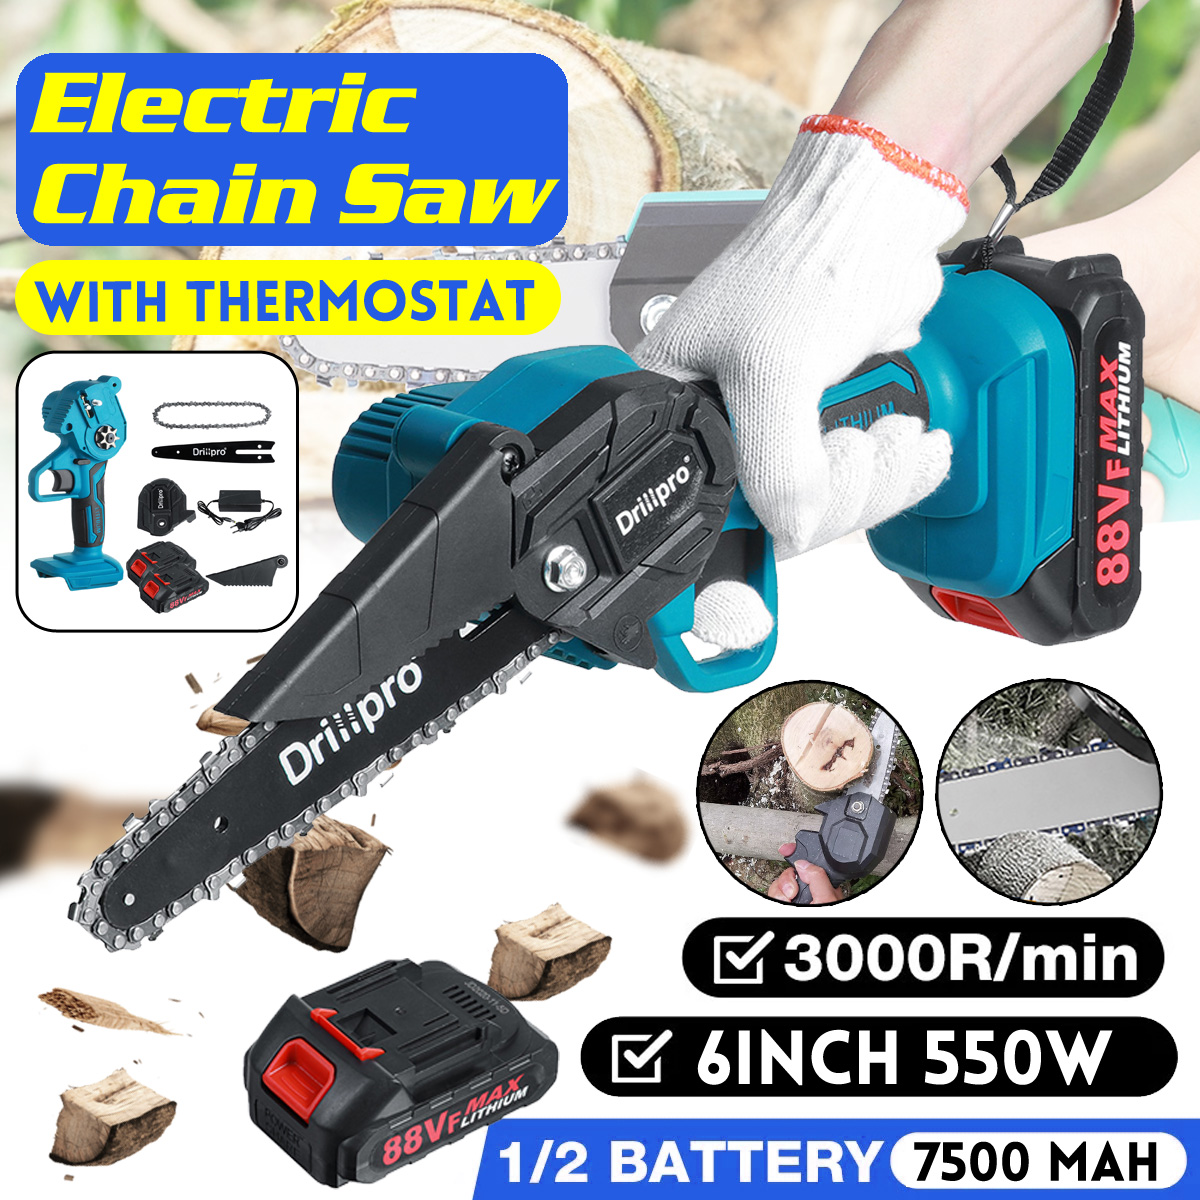 Drillpro-6-Inch-Electric-Chain-Saw-Portable-Woodworking-Tool-Wood-Cutter-W-1-or-2pcs-Battery-For-Mak-1830156-2